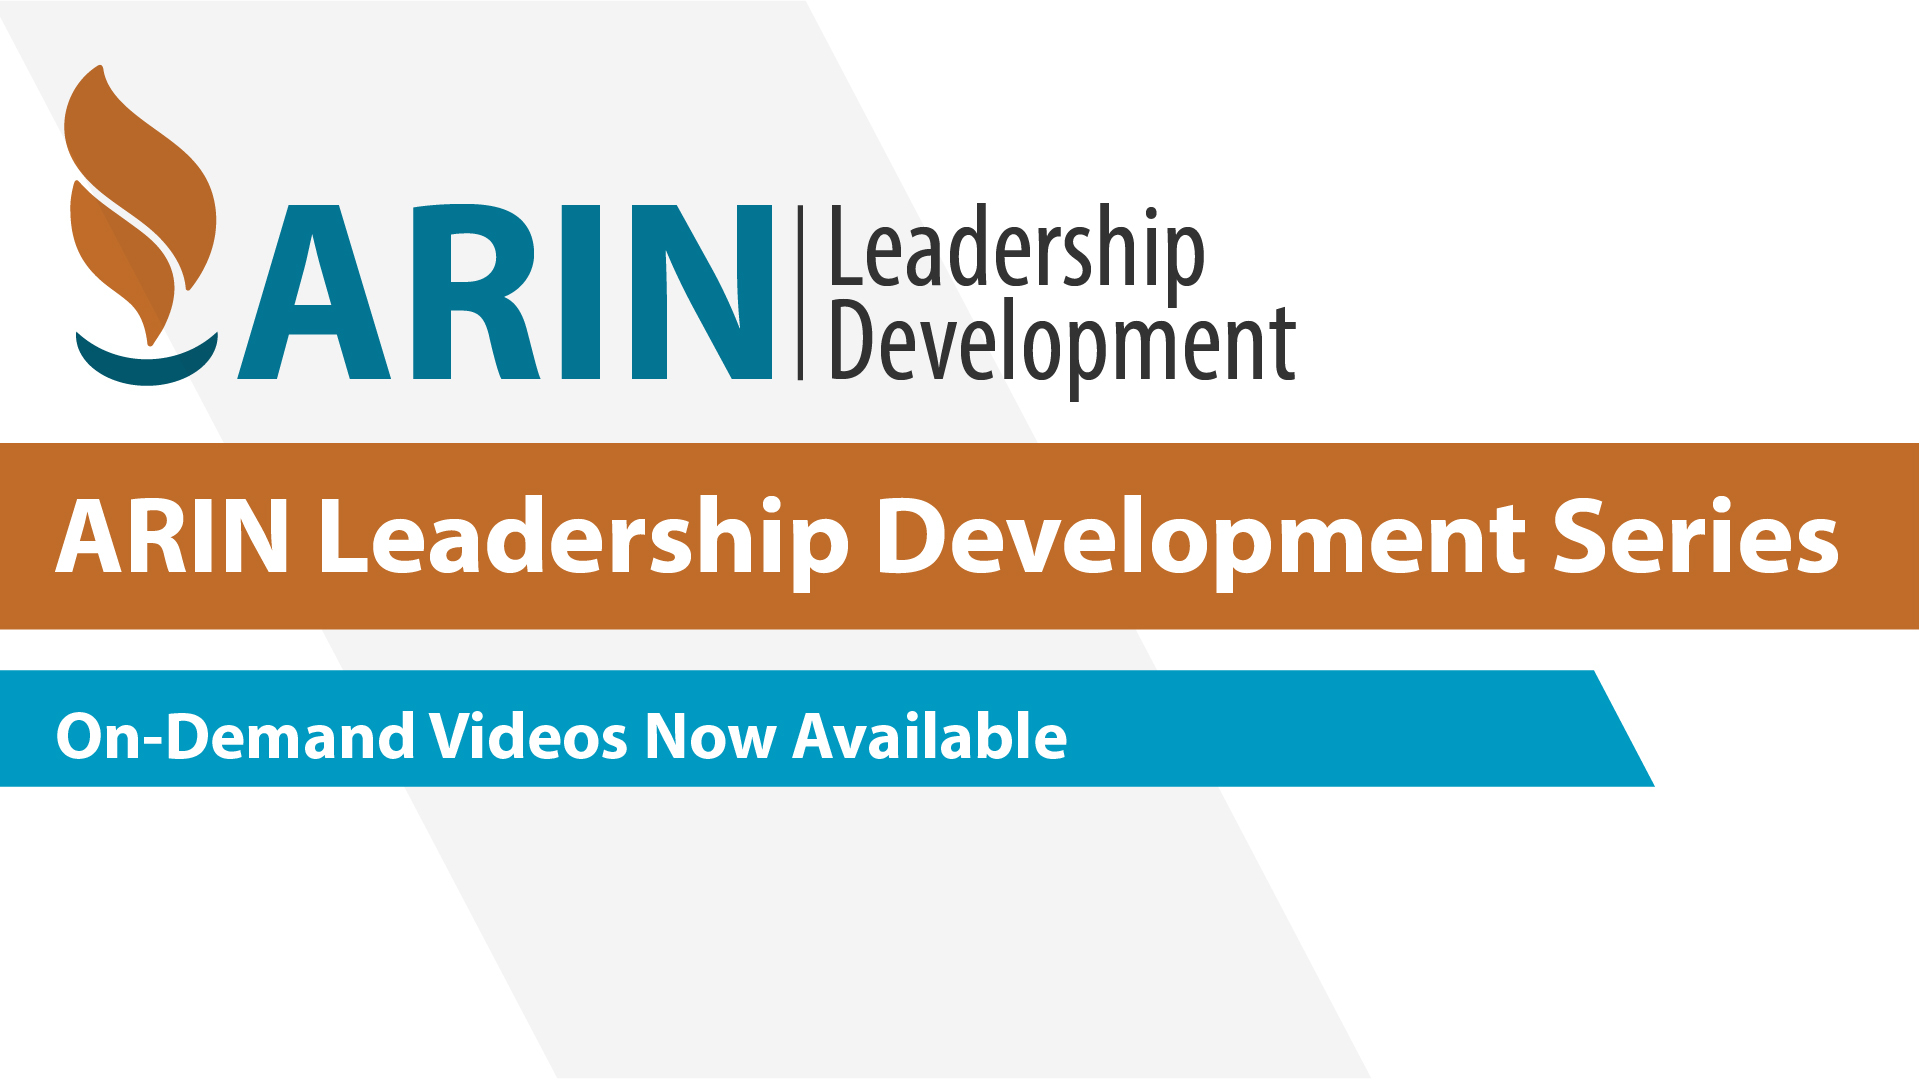 ARIN Leadership Development Series On-Demand Videos Now Available